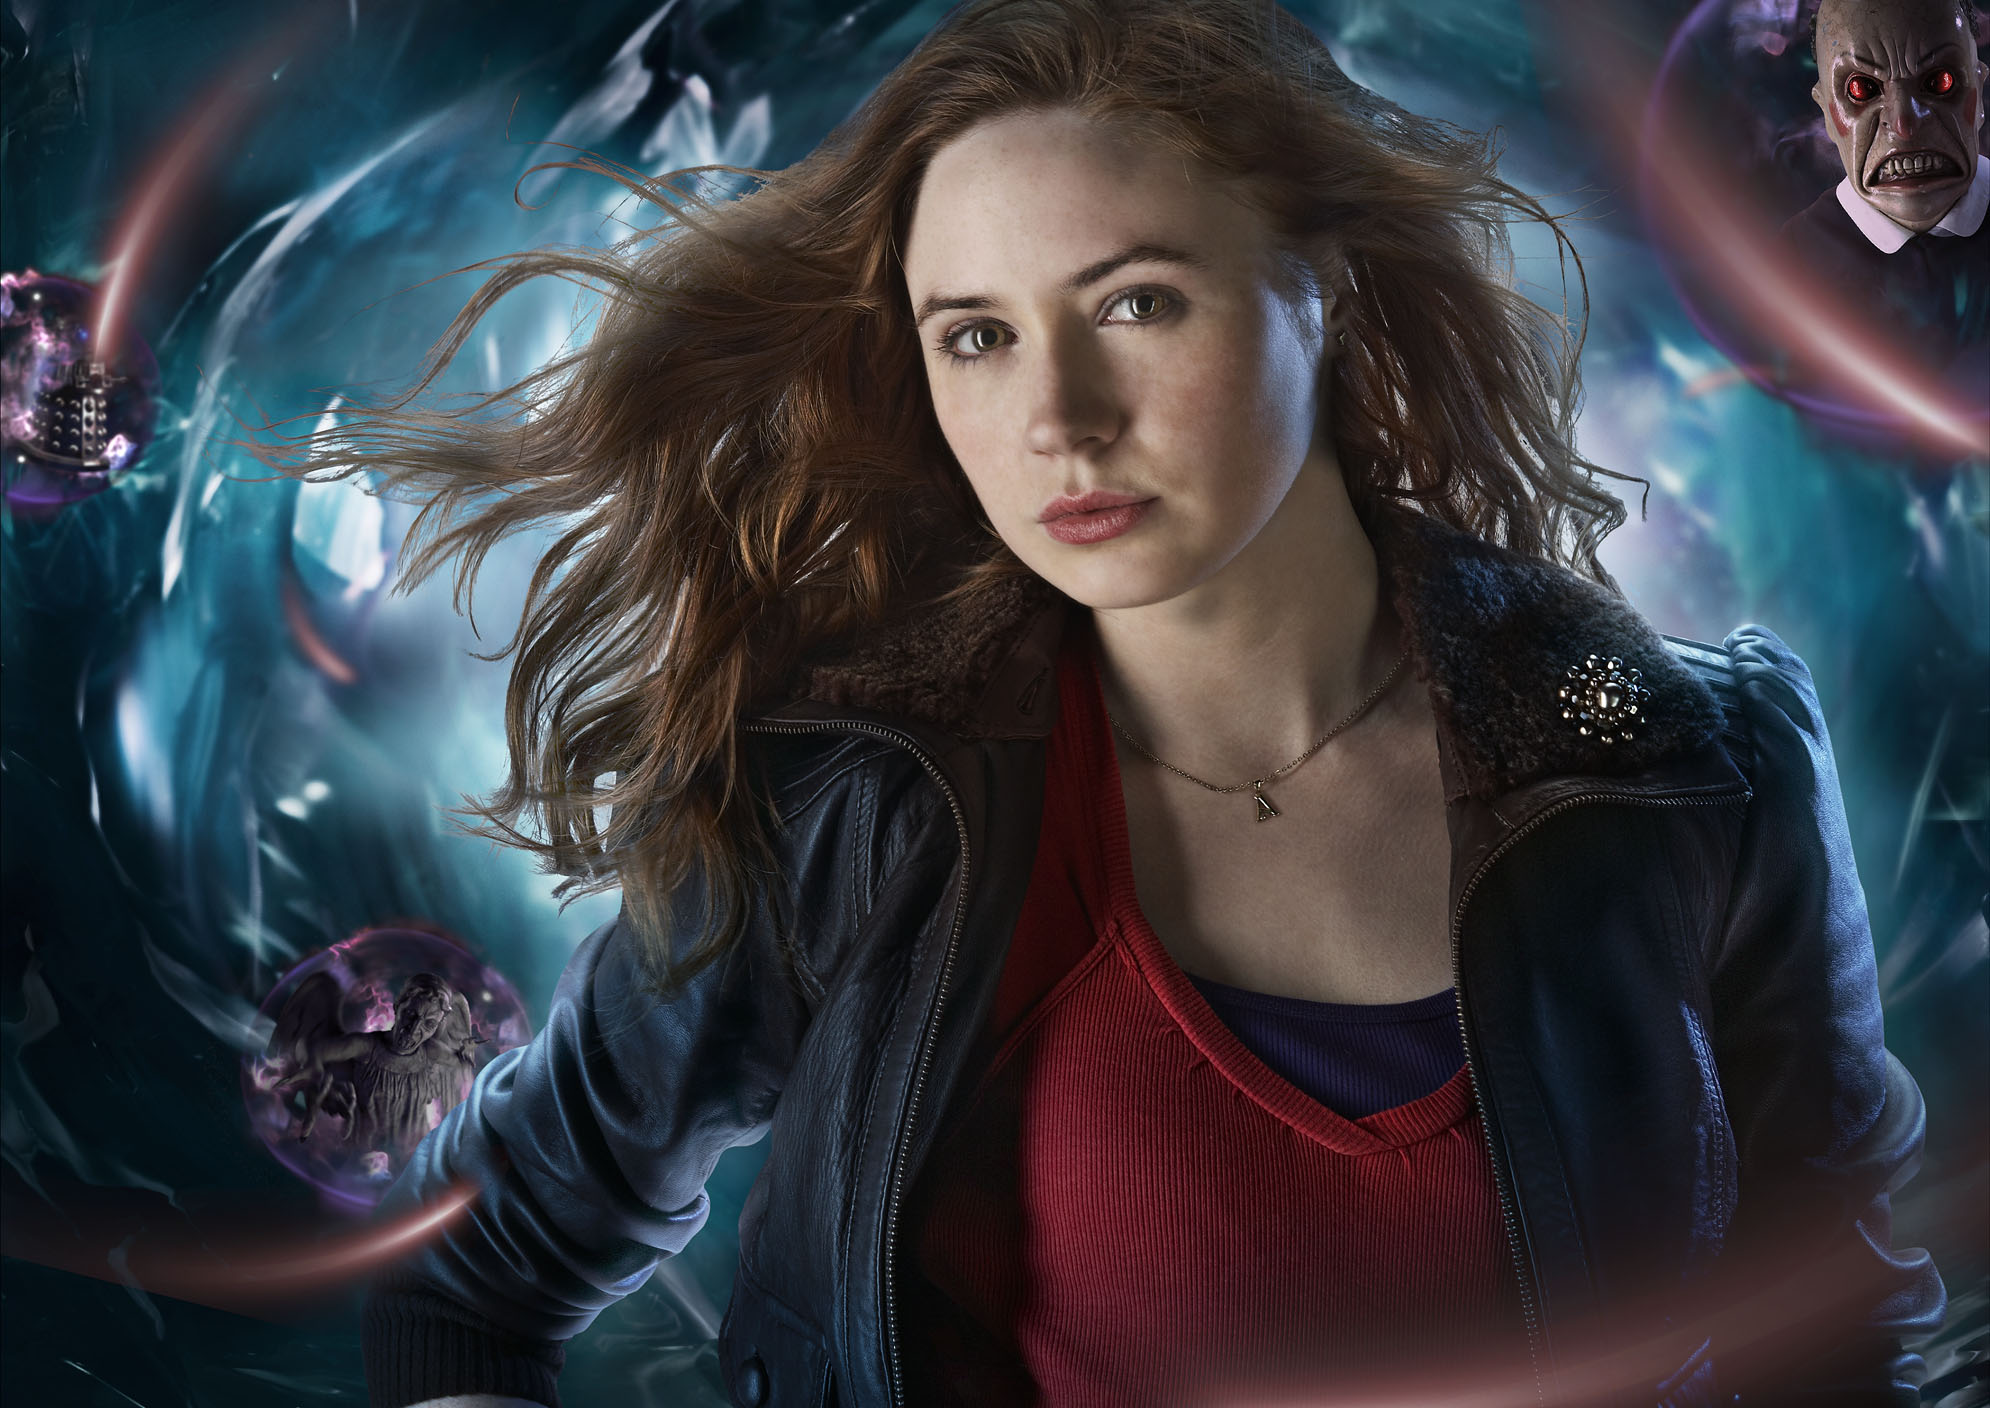 Karen Gillan Doctor who wallpapers HD A20 - Dr Who Wallpapers | Doctor who backgrounds | doctor who tardis wallpapers | Doctor who desktop wallpapers | doctor who phone wallpapers.